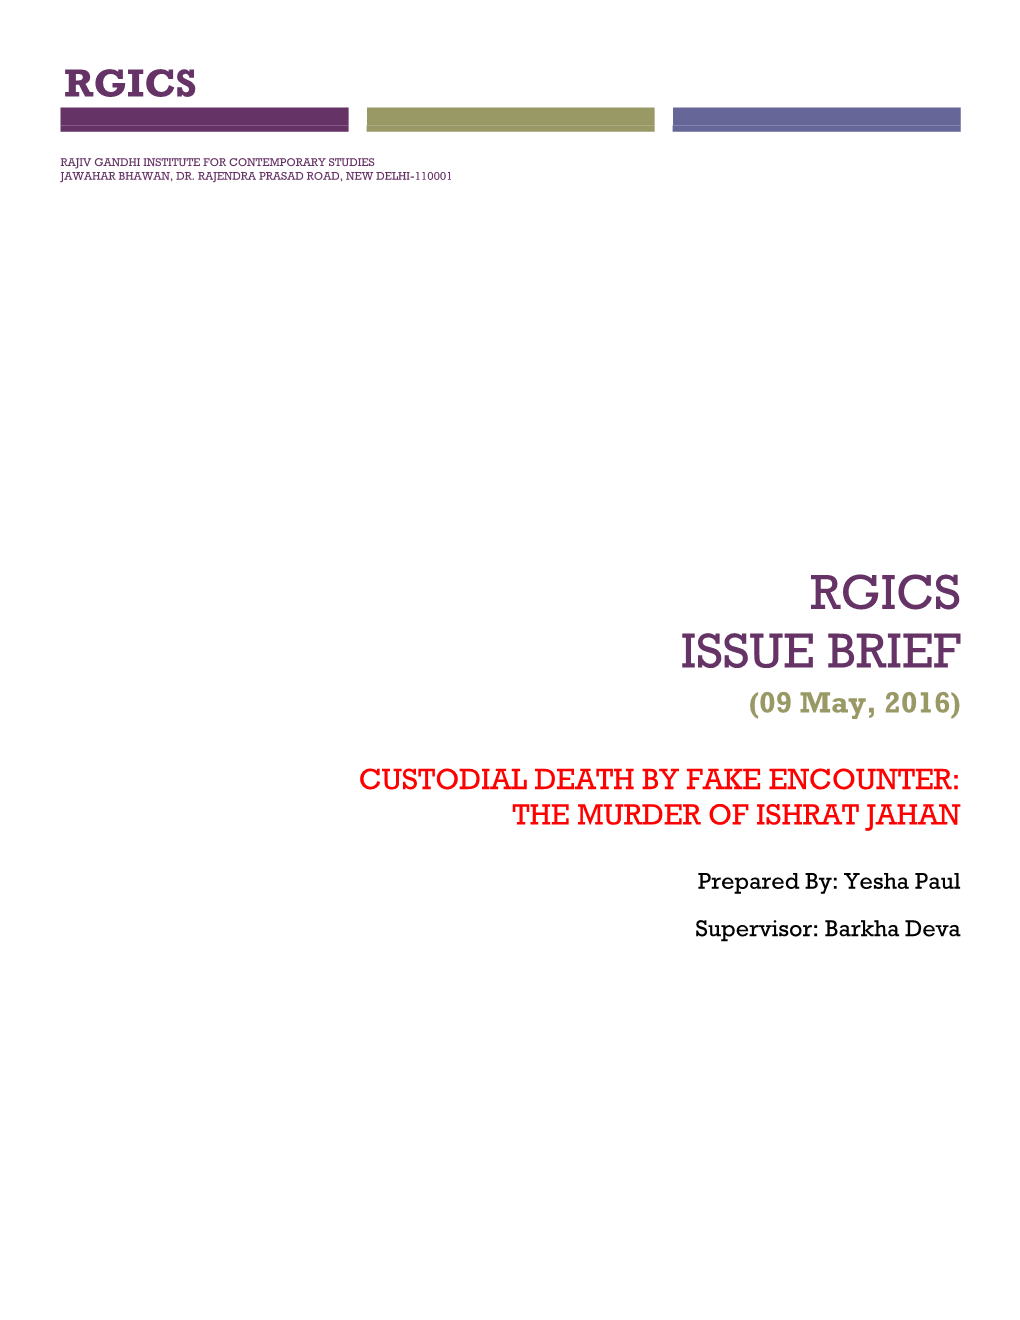 RGICS ISSUE BRIEF (09 May, 2016)